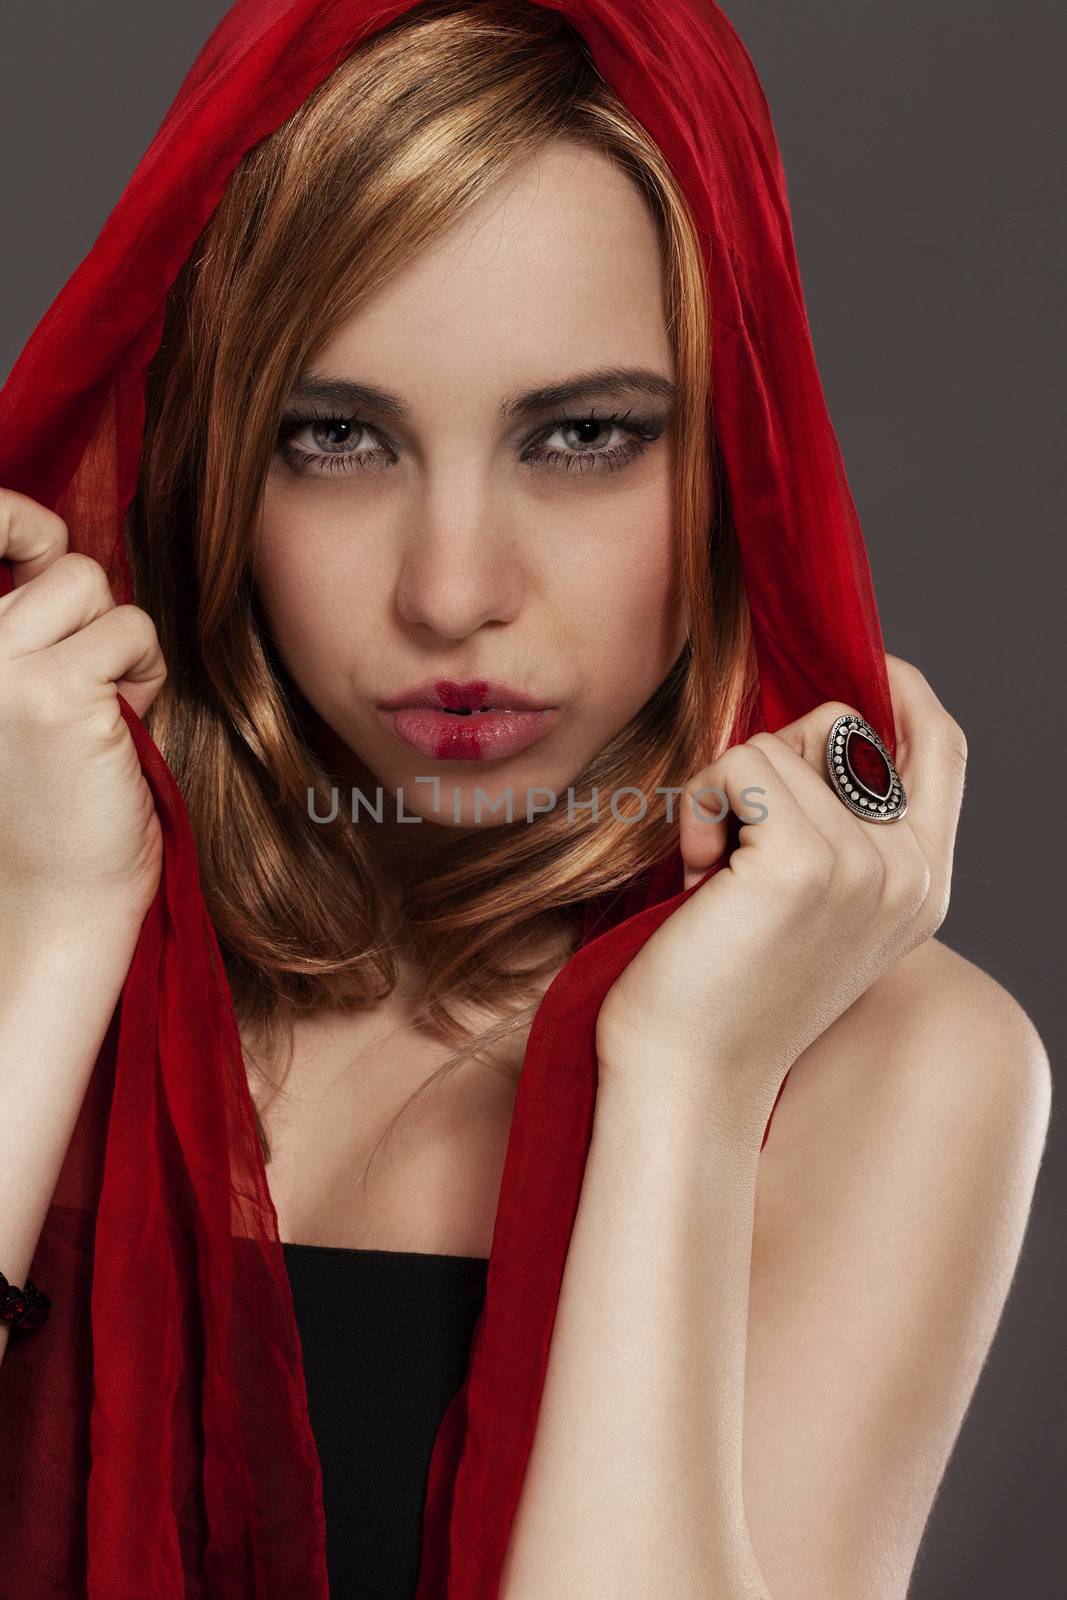 beautiful woman with a red scarf red riding hood like